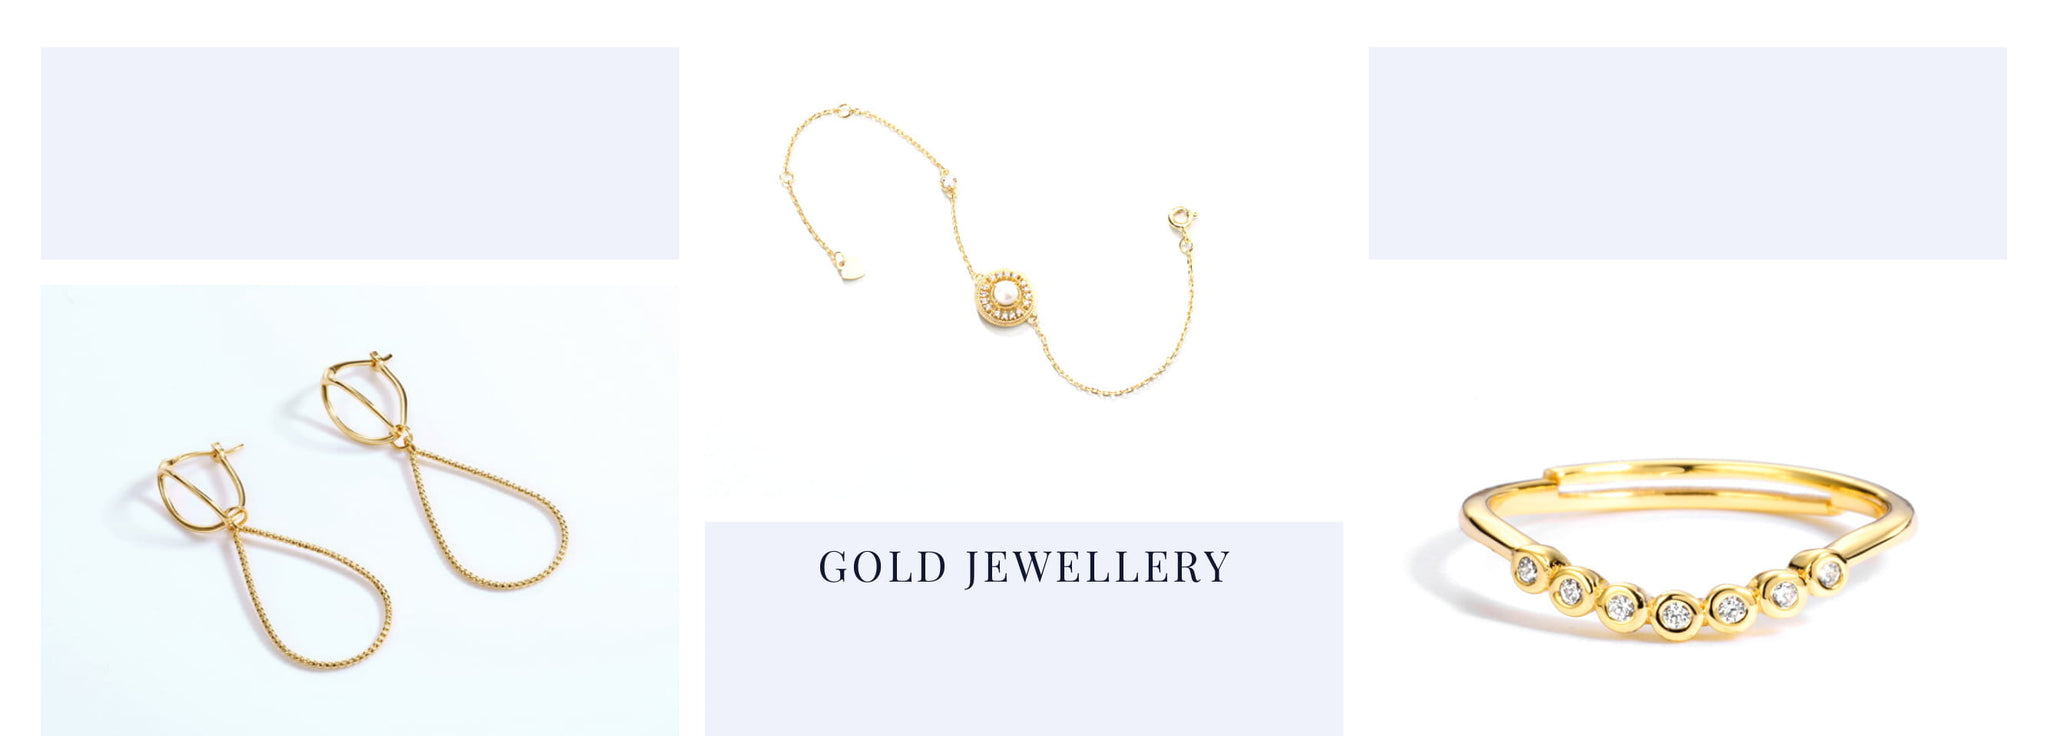 All Gold Jewellery from Bella Mayford